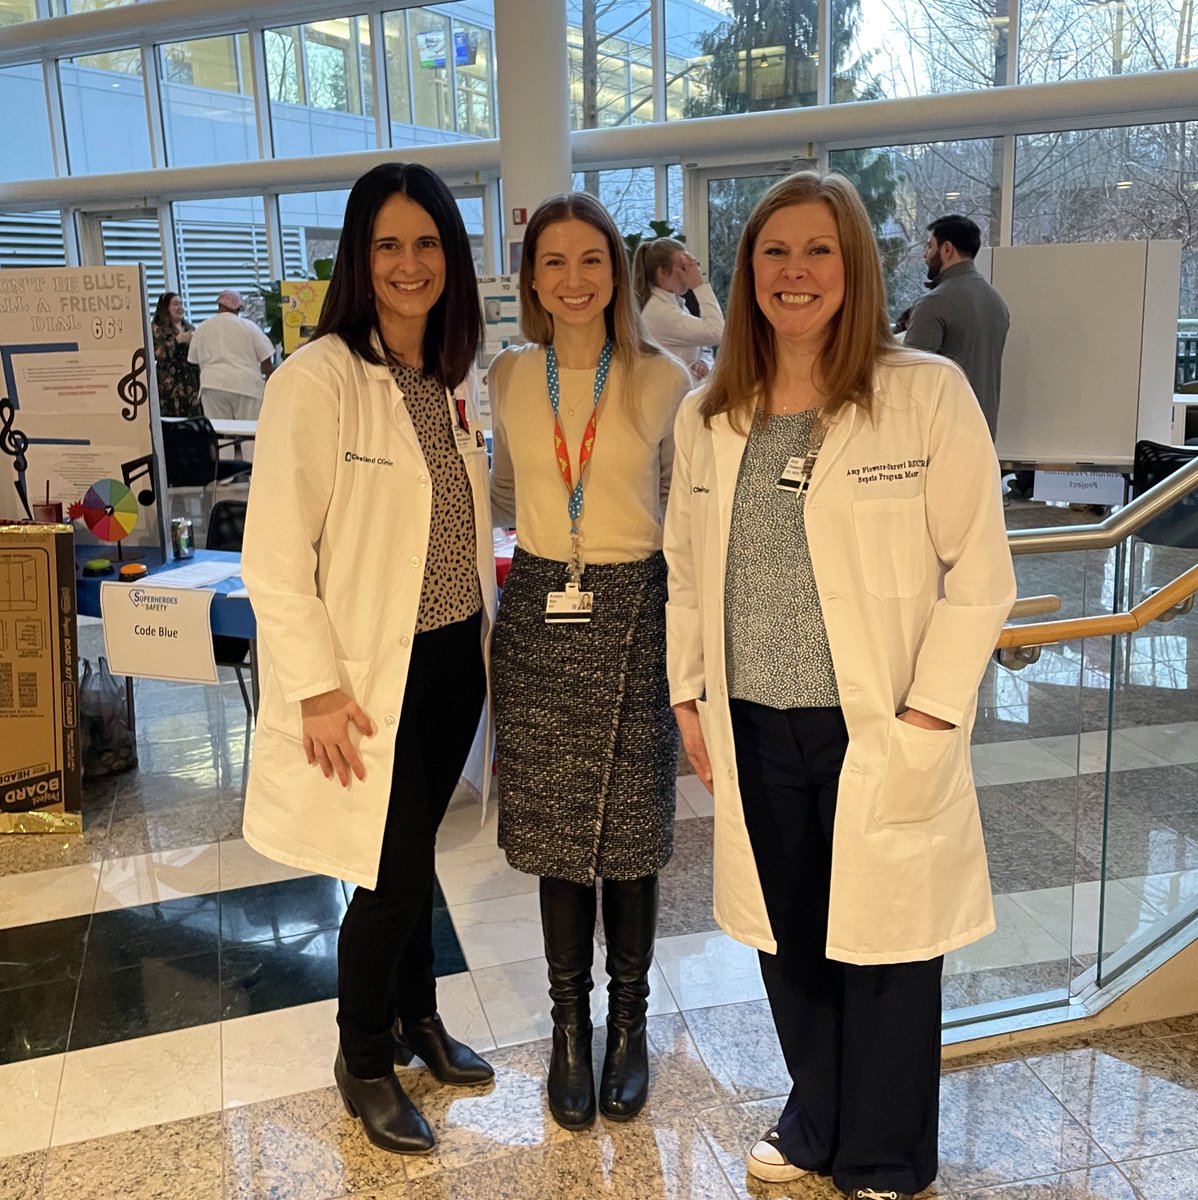 Shout out to all my amazing colleagues at @ClevelandClinic Fairview! Thank you to Mary Rimelspach Amy Flowers-Surovi and the 32 teams who shared their work at our annual Patient Safey Fair!